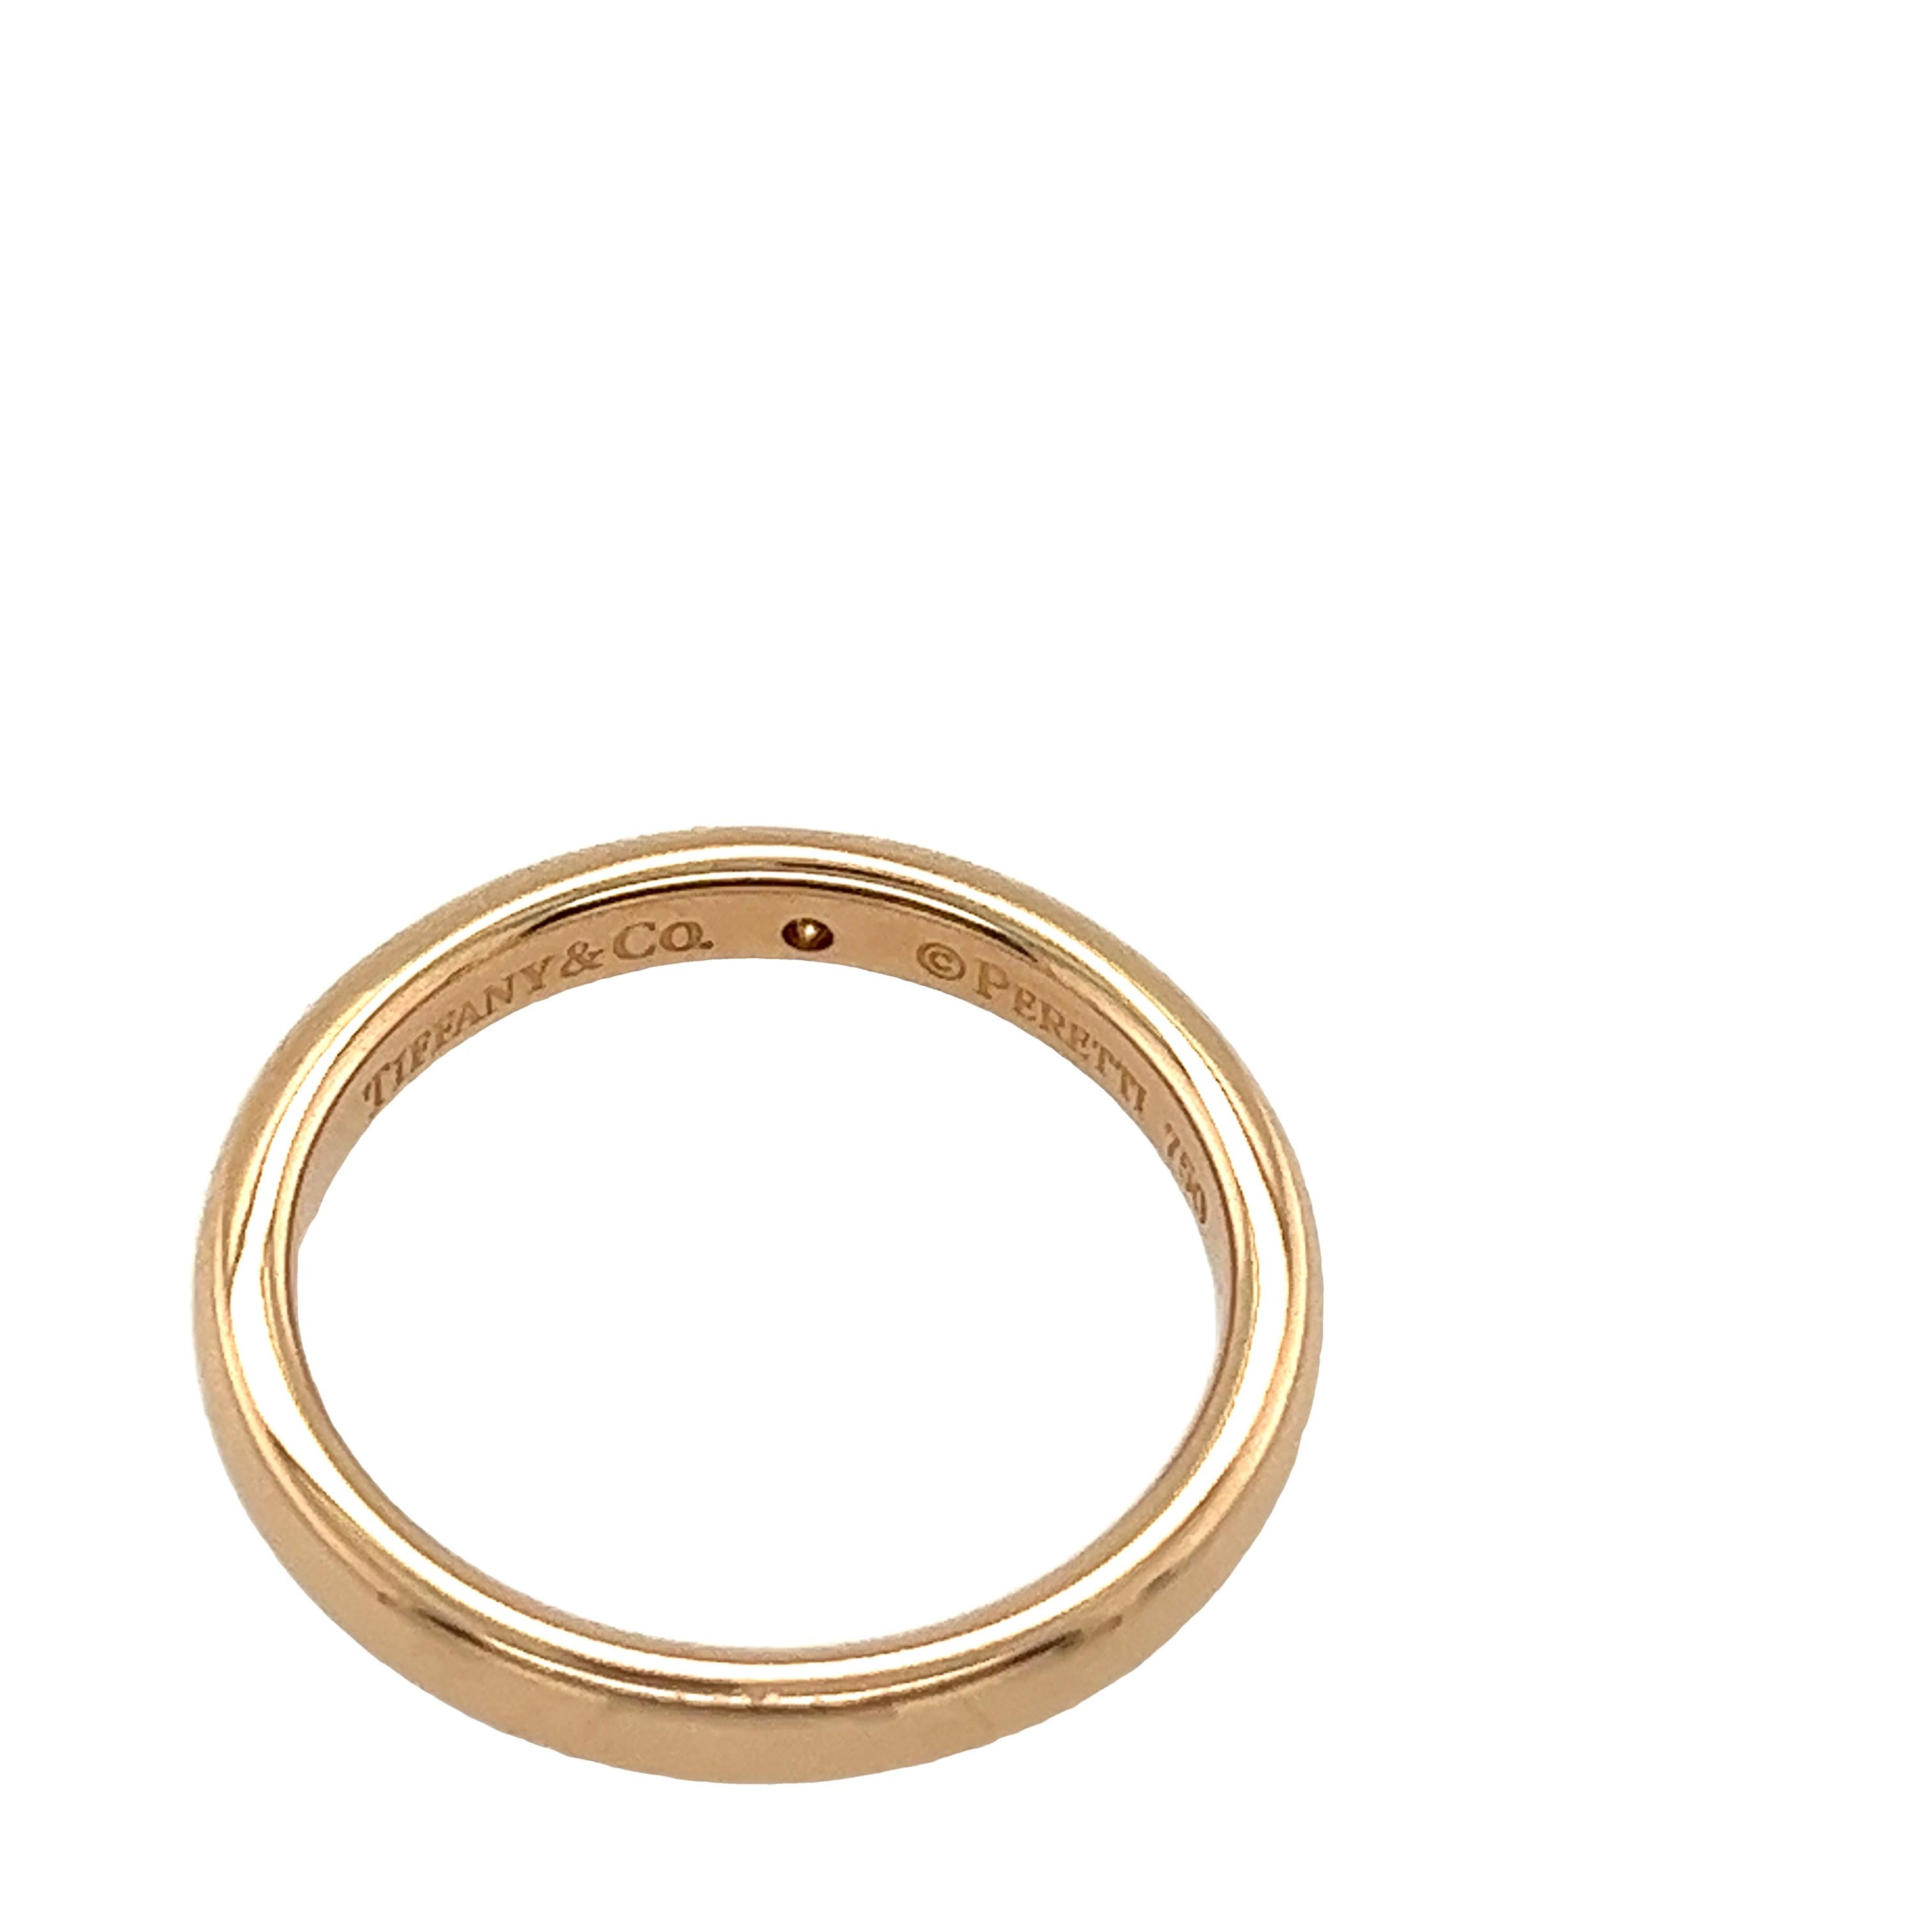 The Tiffany & Co. 18ct Rose Gold Elsa Peretti Band Ring with 1 Diamond is a stunning piece of jewellery designed by Elsa Peretti, a renowned designer known for her elegant and minimalist creations. This particular ring features a simple yet